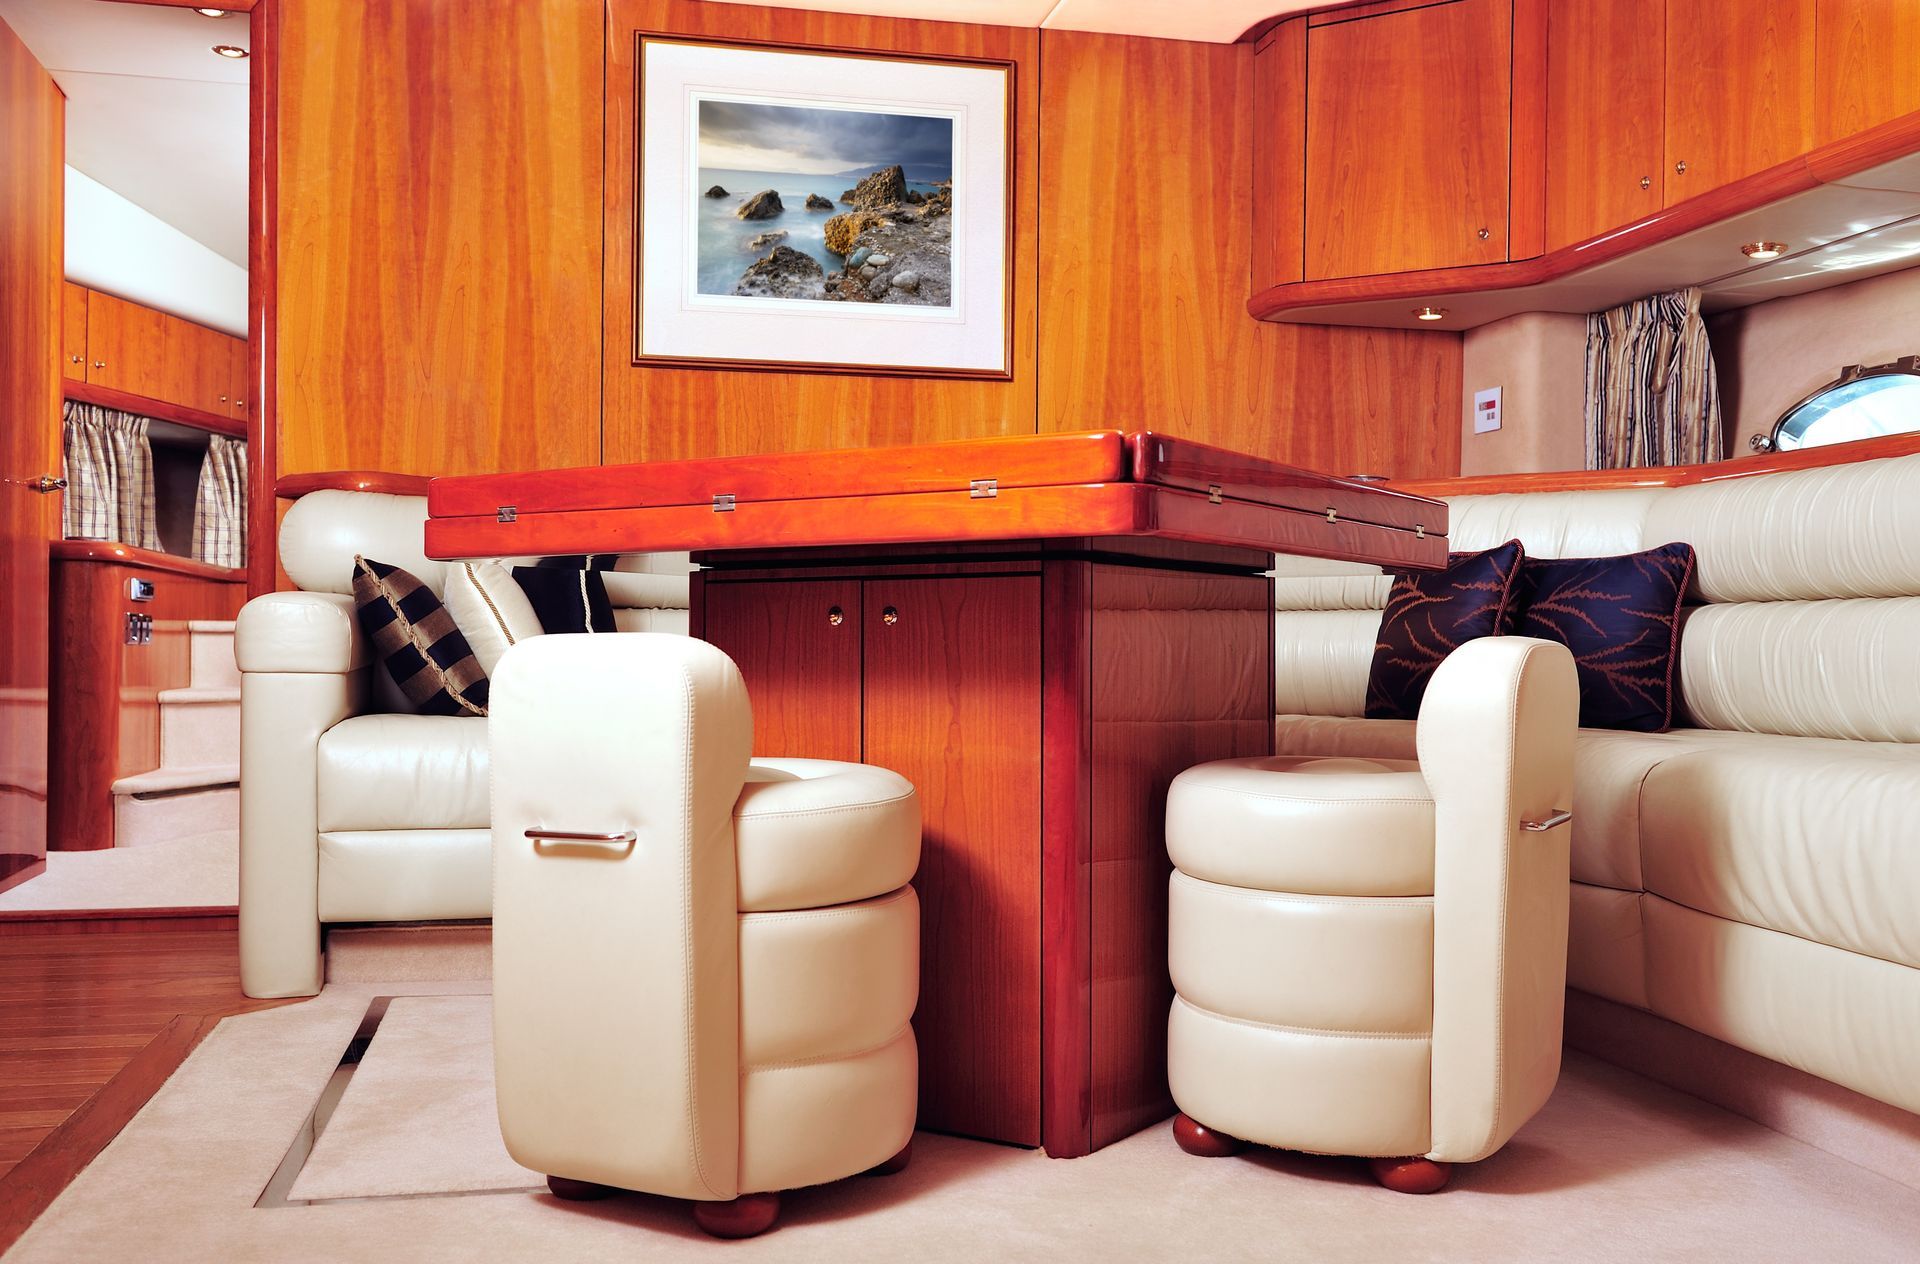 Cream leather upholstered seating area and small chairs around small wooden table inside a boat